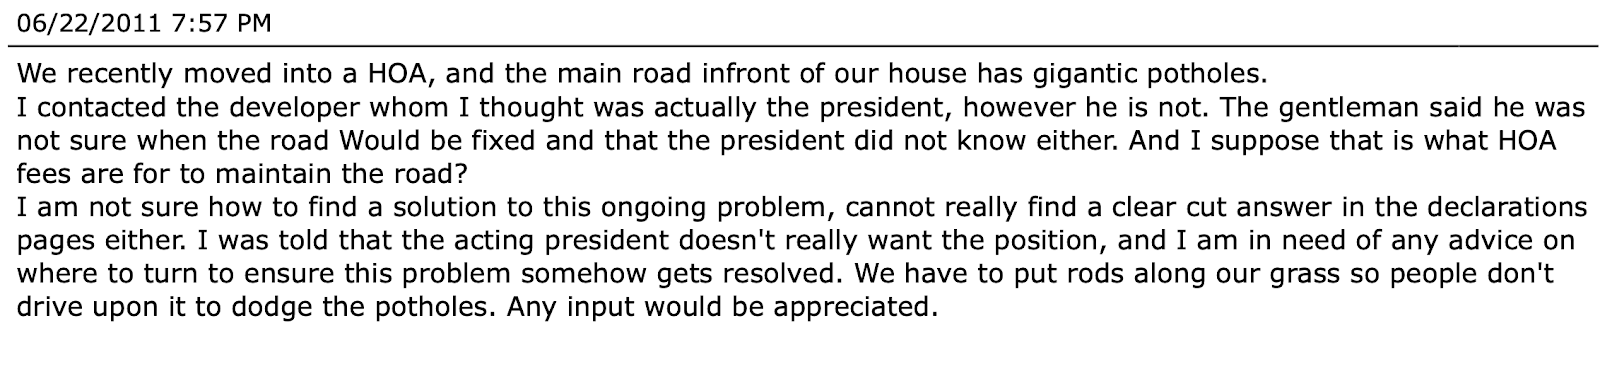 An HOATalk.com forum answer from homeowner frustrated about lack of asphalt repair.